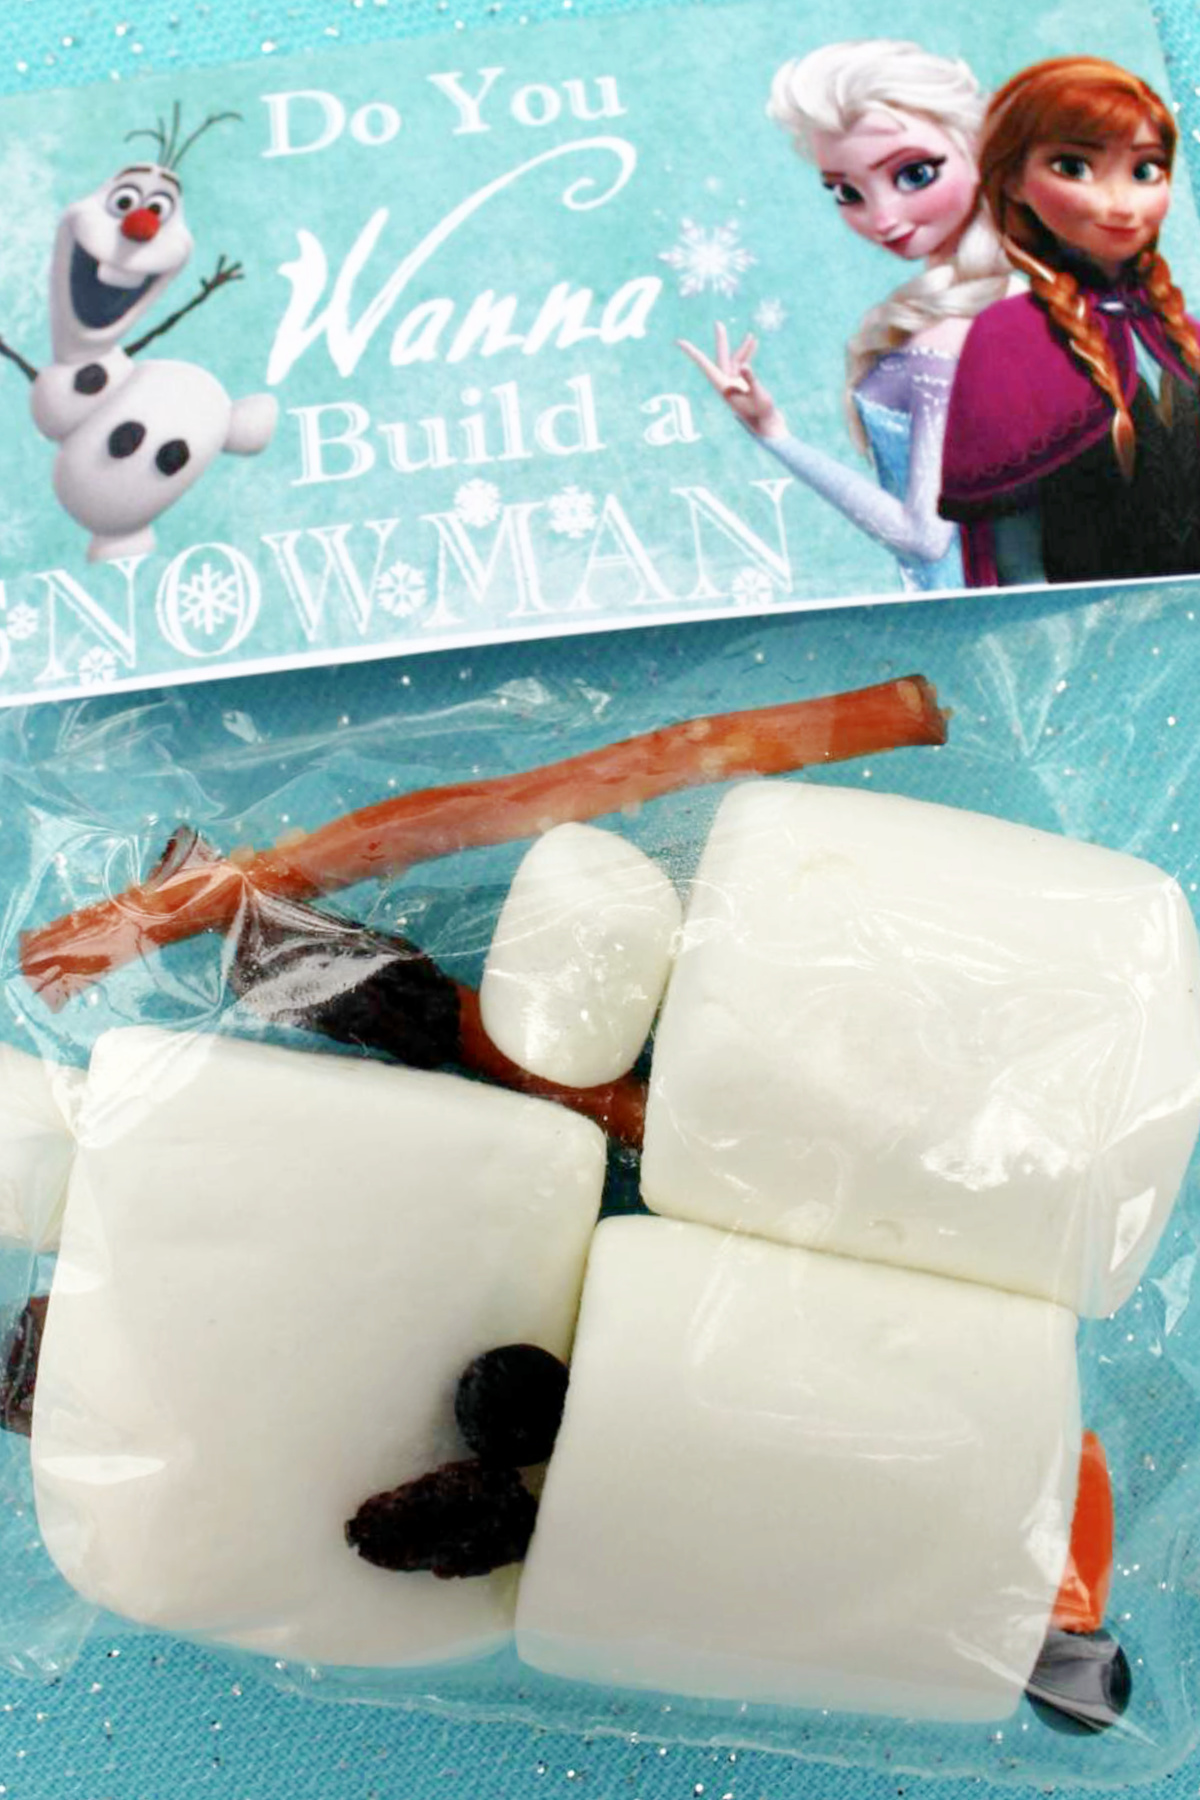 Do you want to build a snowman assemble pack